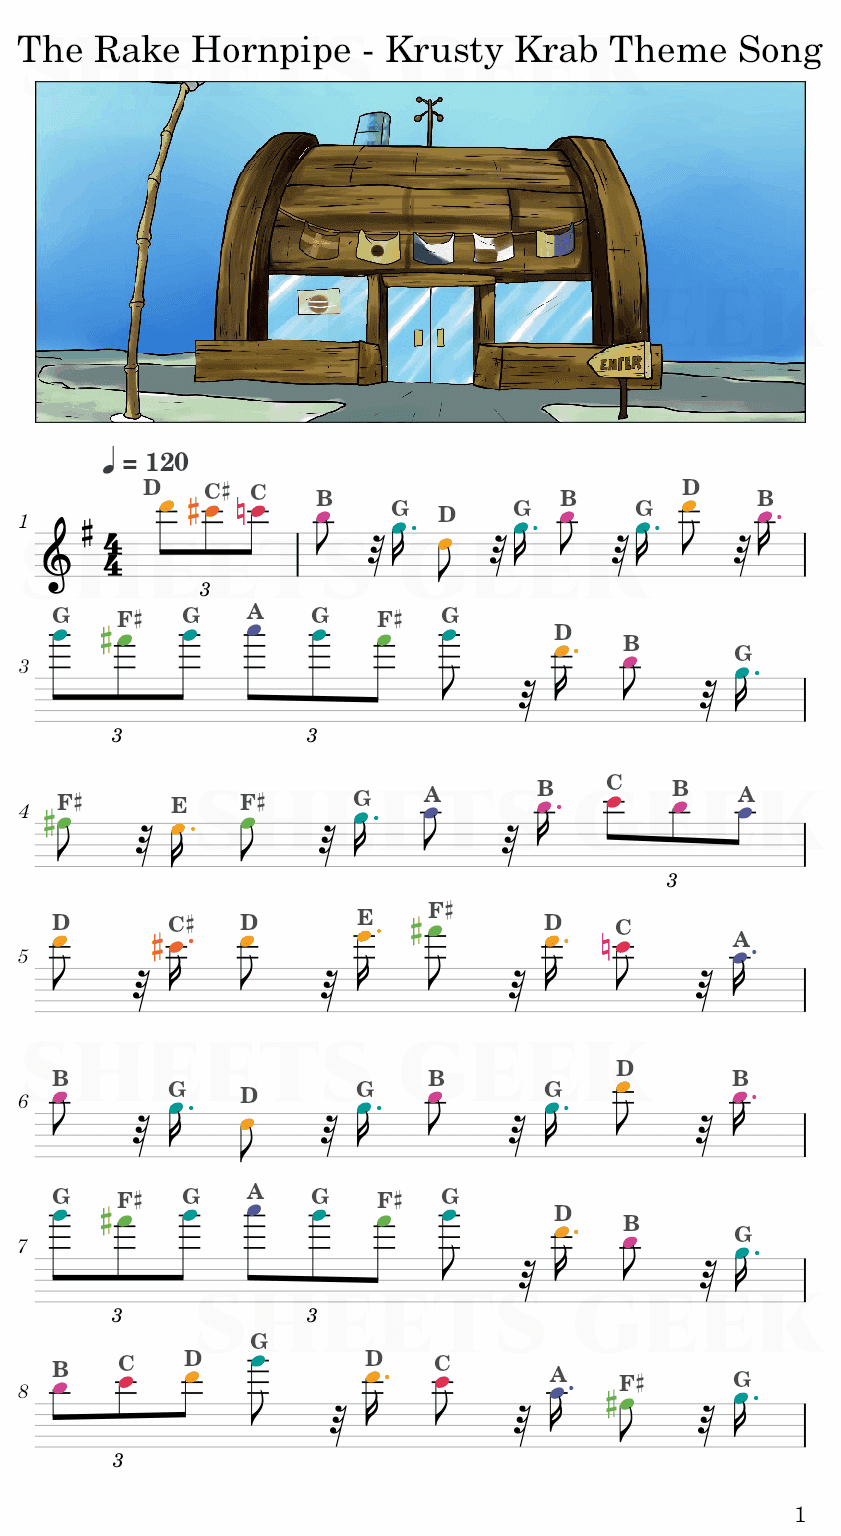 The Rake Hornpipe - Krusty Krab Theme Song Easy Sheets Music Free for piano, keyboard, flute, violin, sax, celllo 1